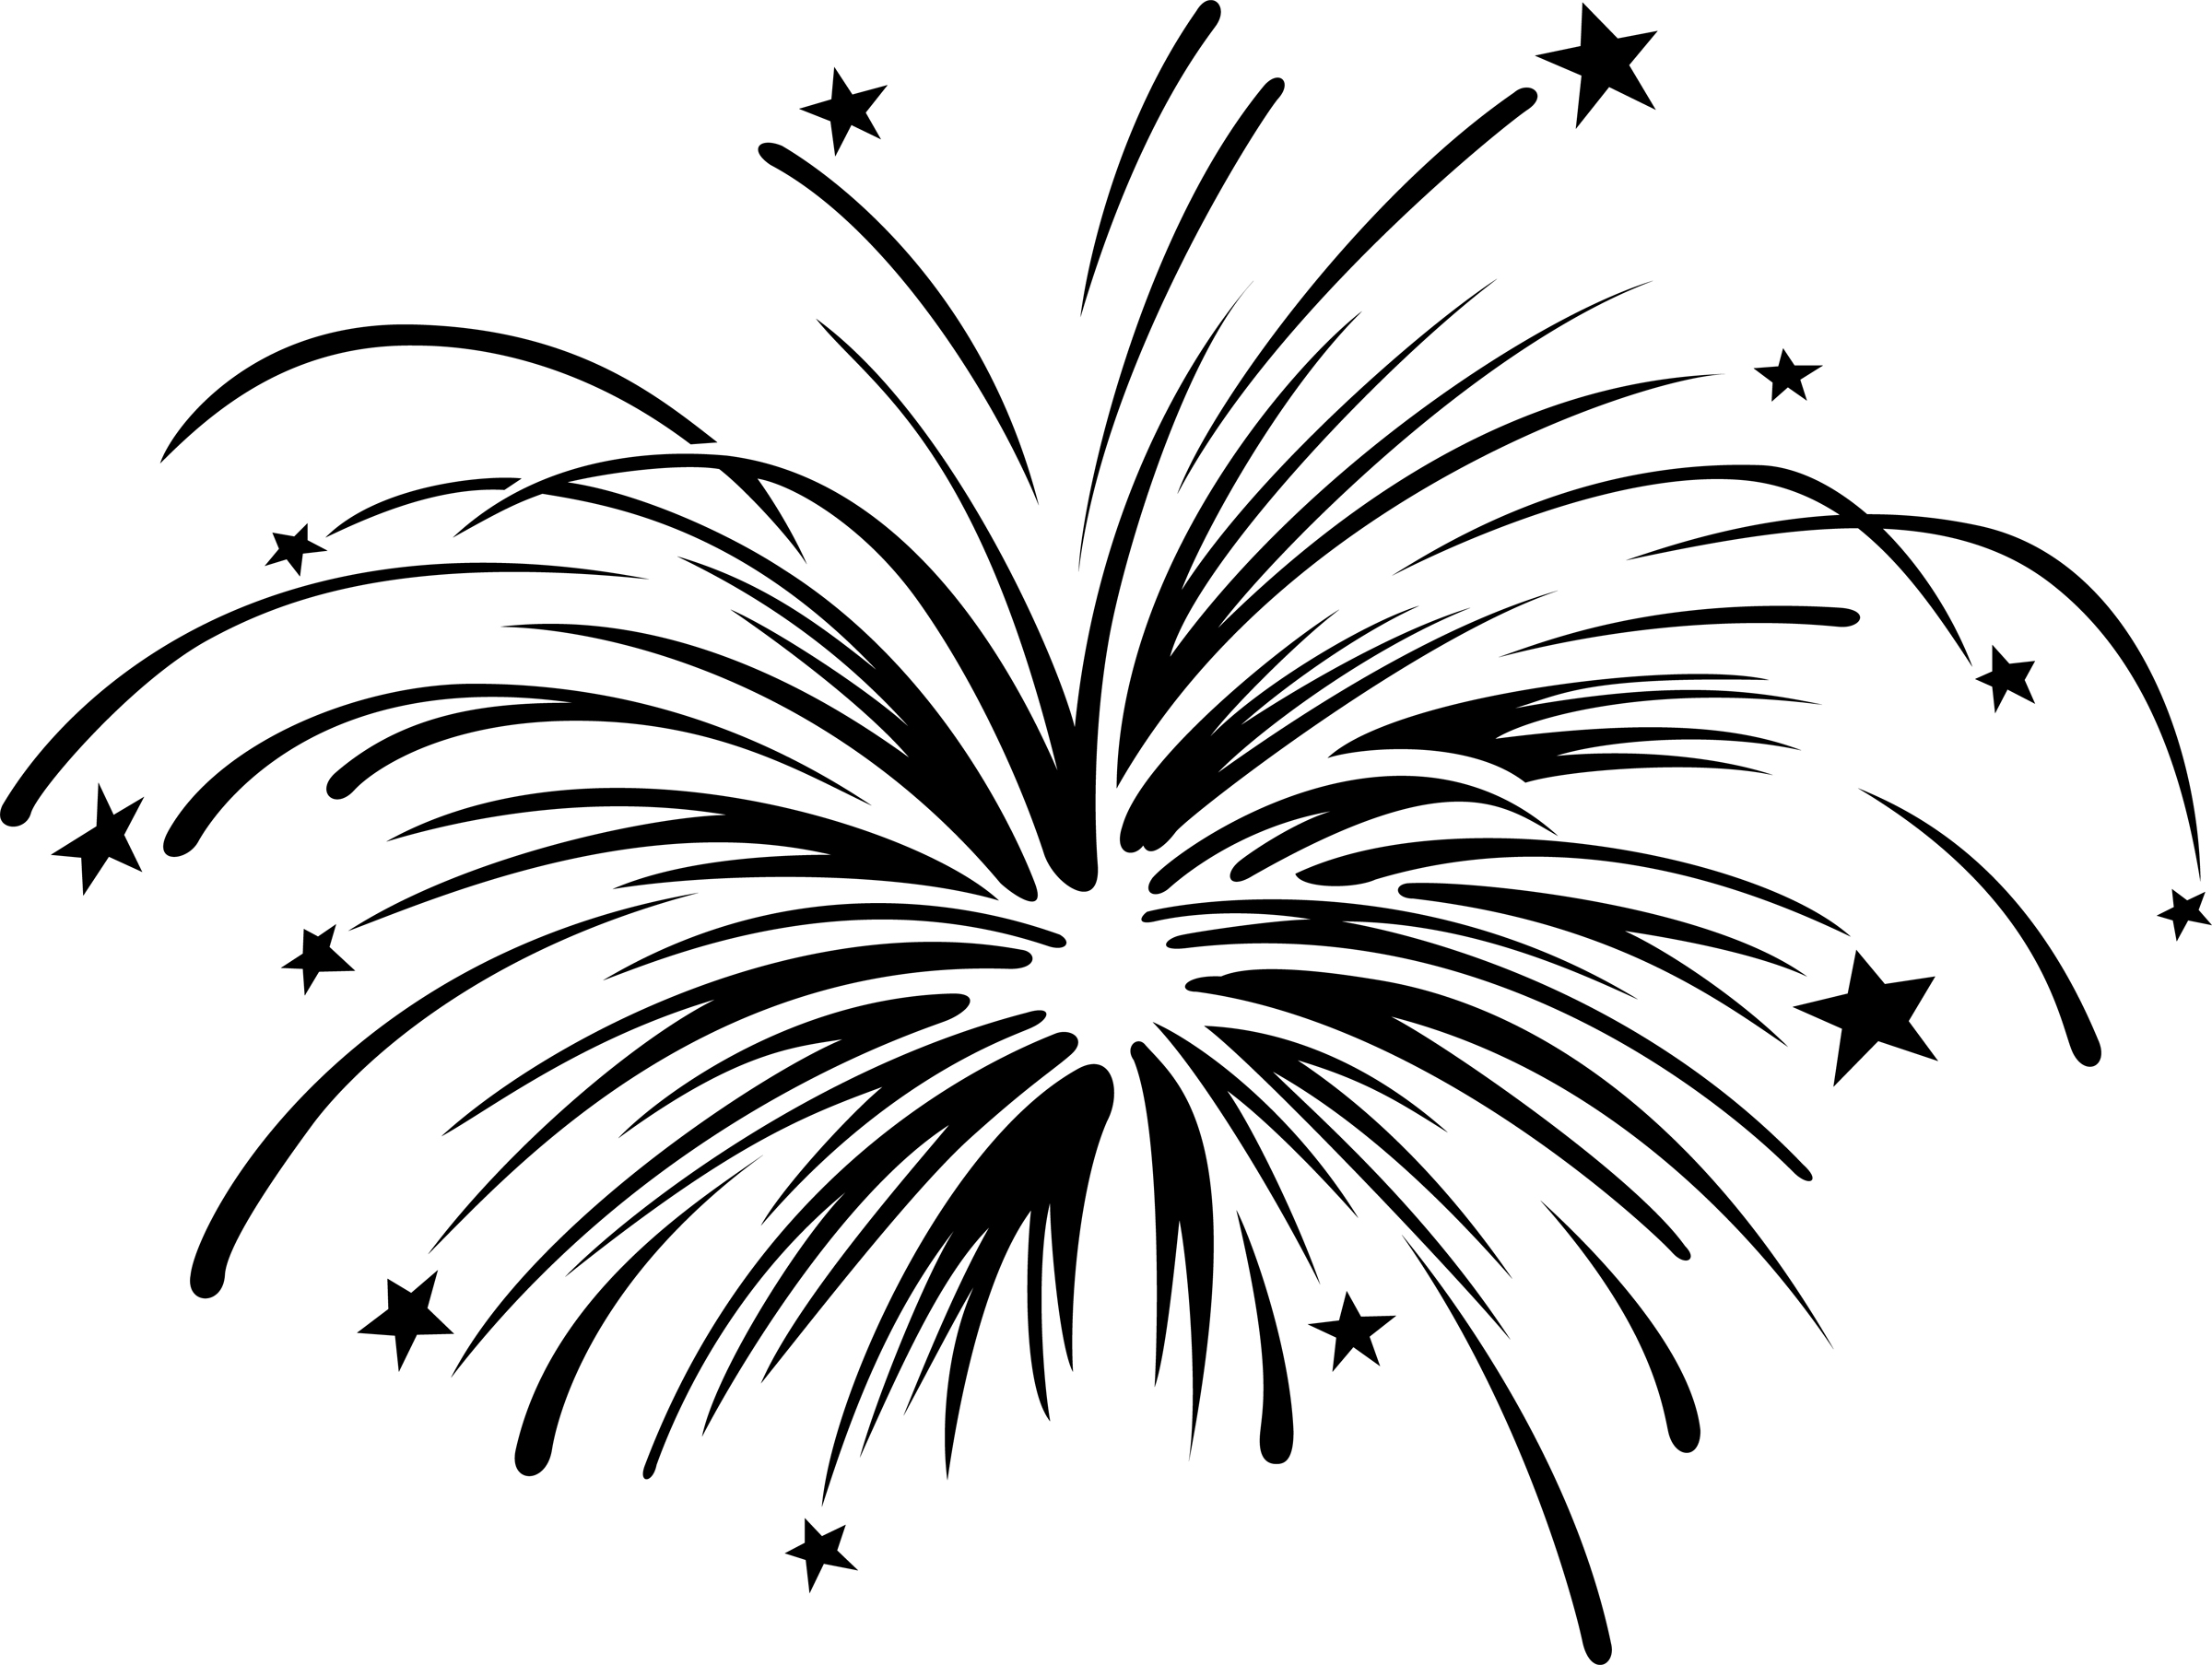 Fireworks Clipart Black And White   Clipart Panda   Free Clipart